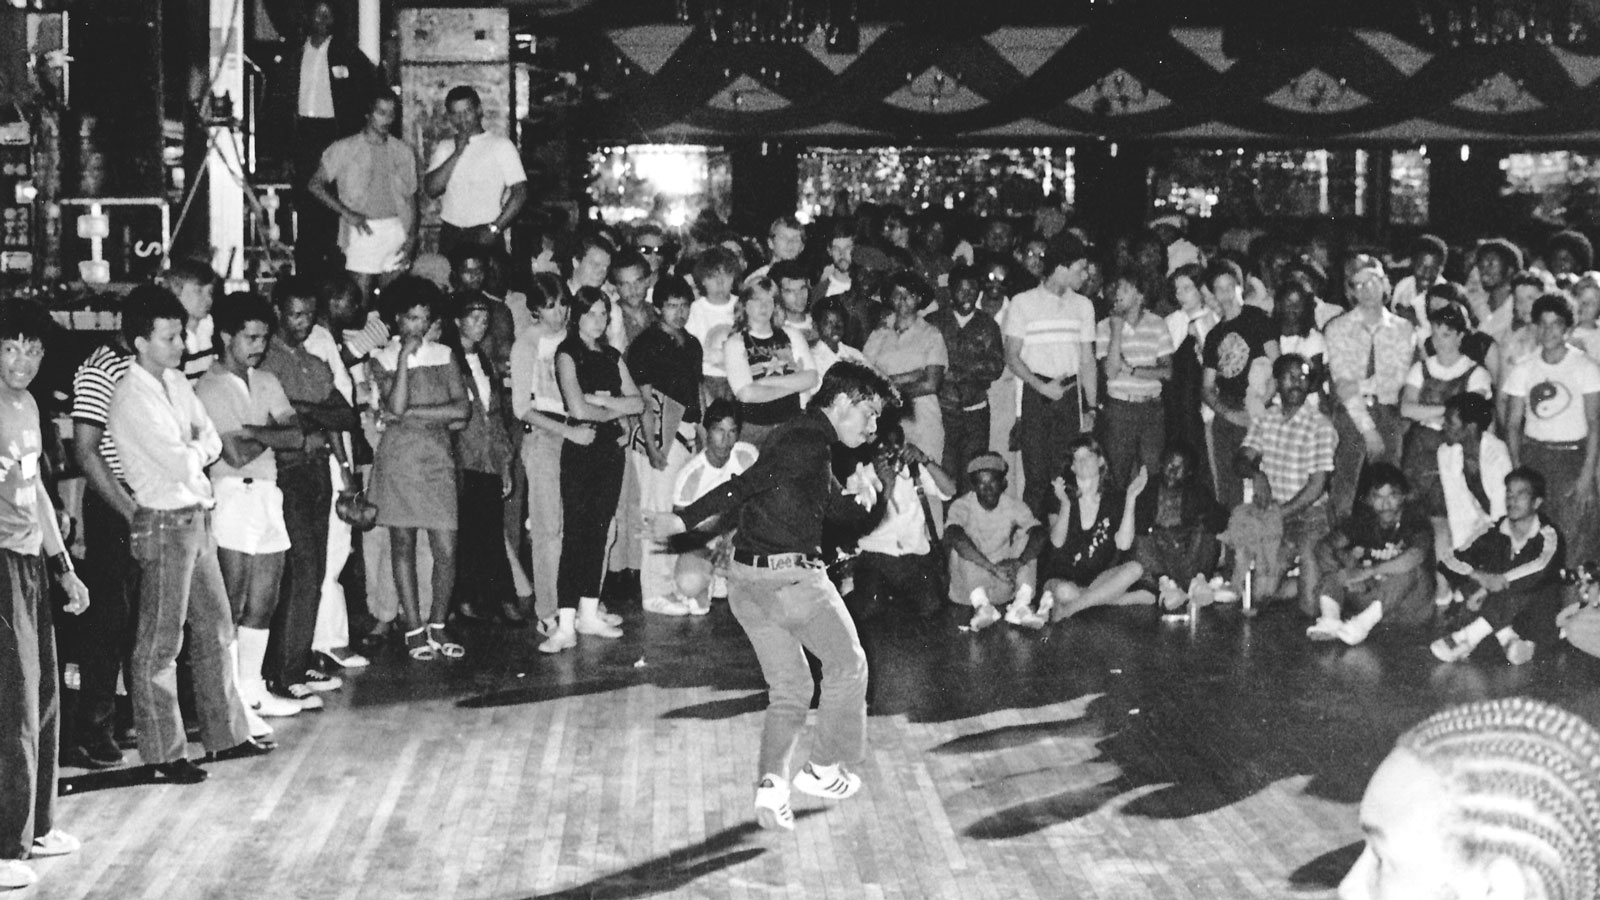 An unidentified b-boy performs at the Roseland Ballroom in NYC, 1981